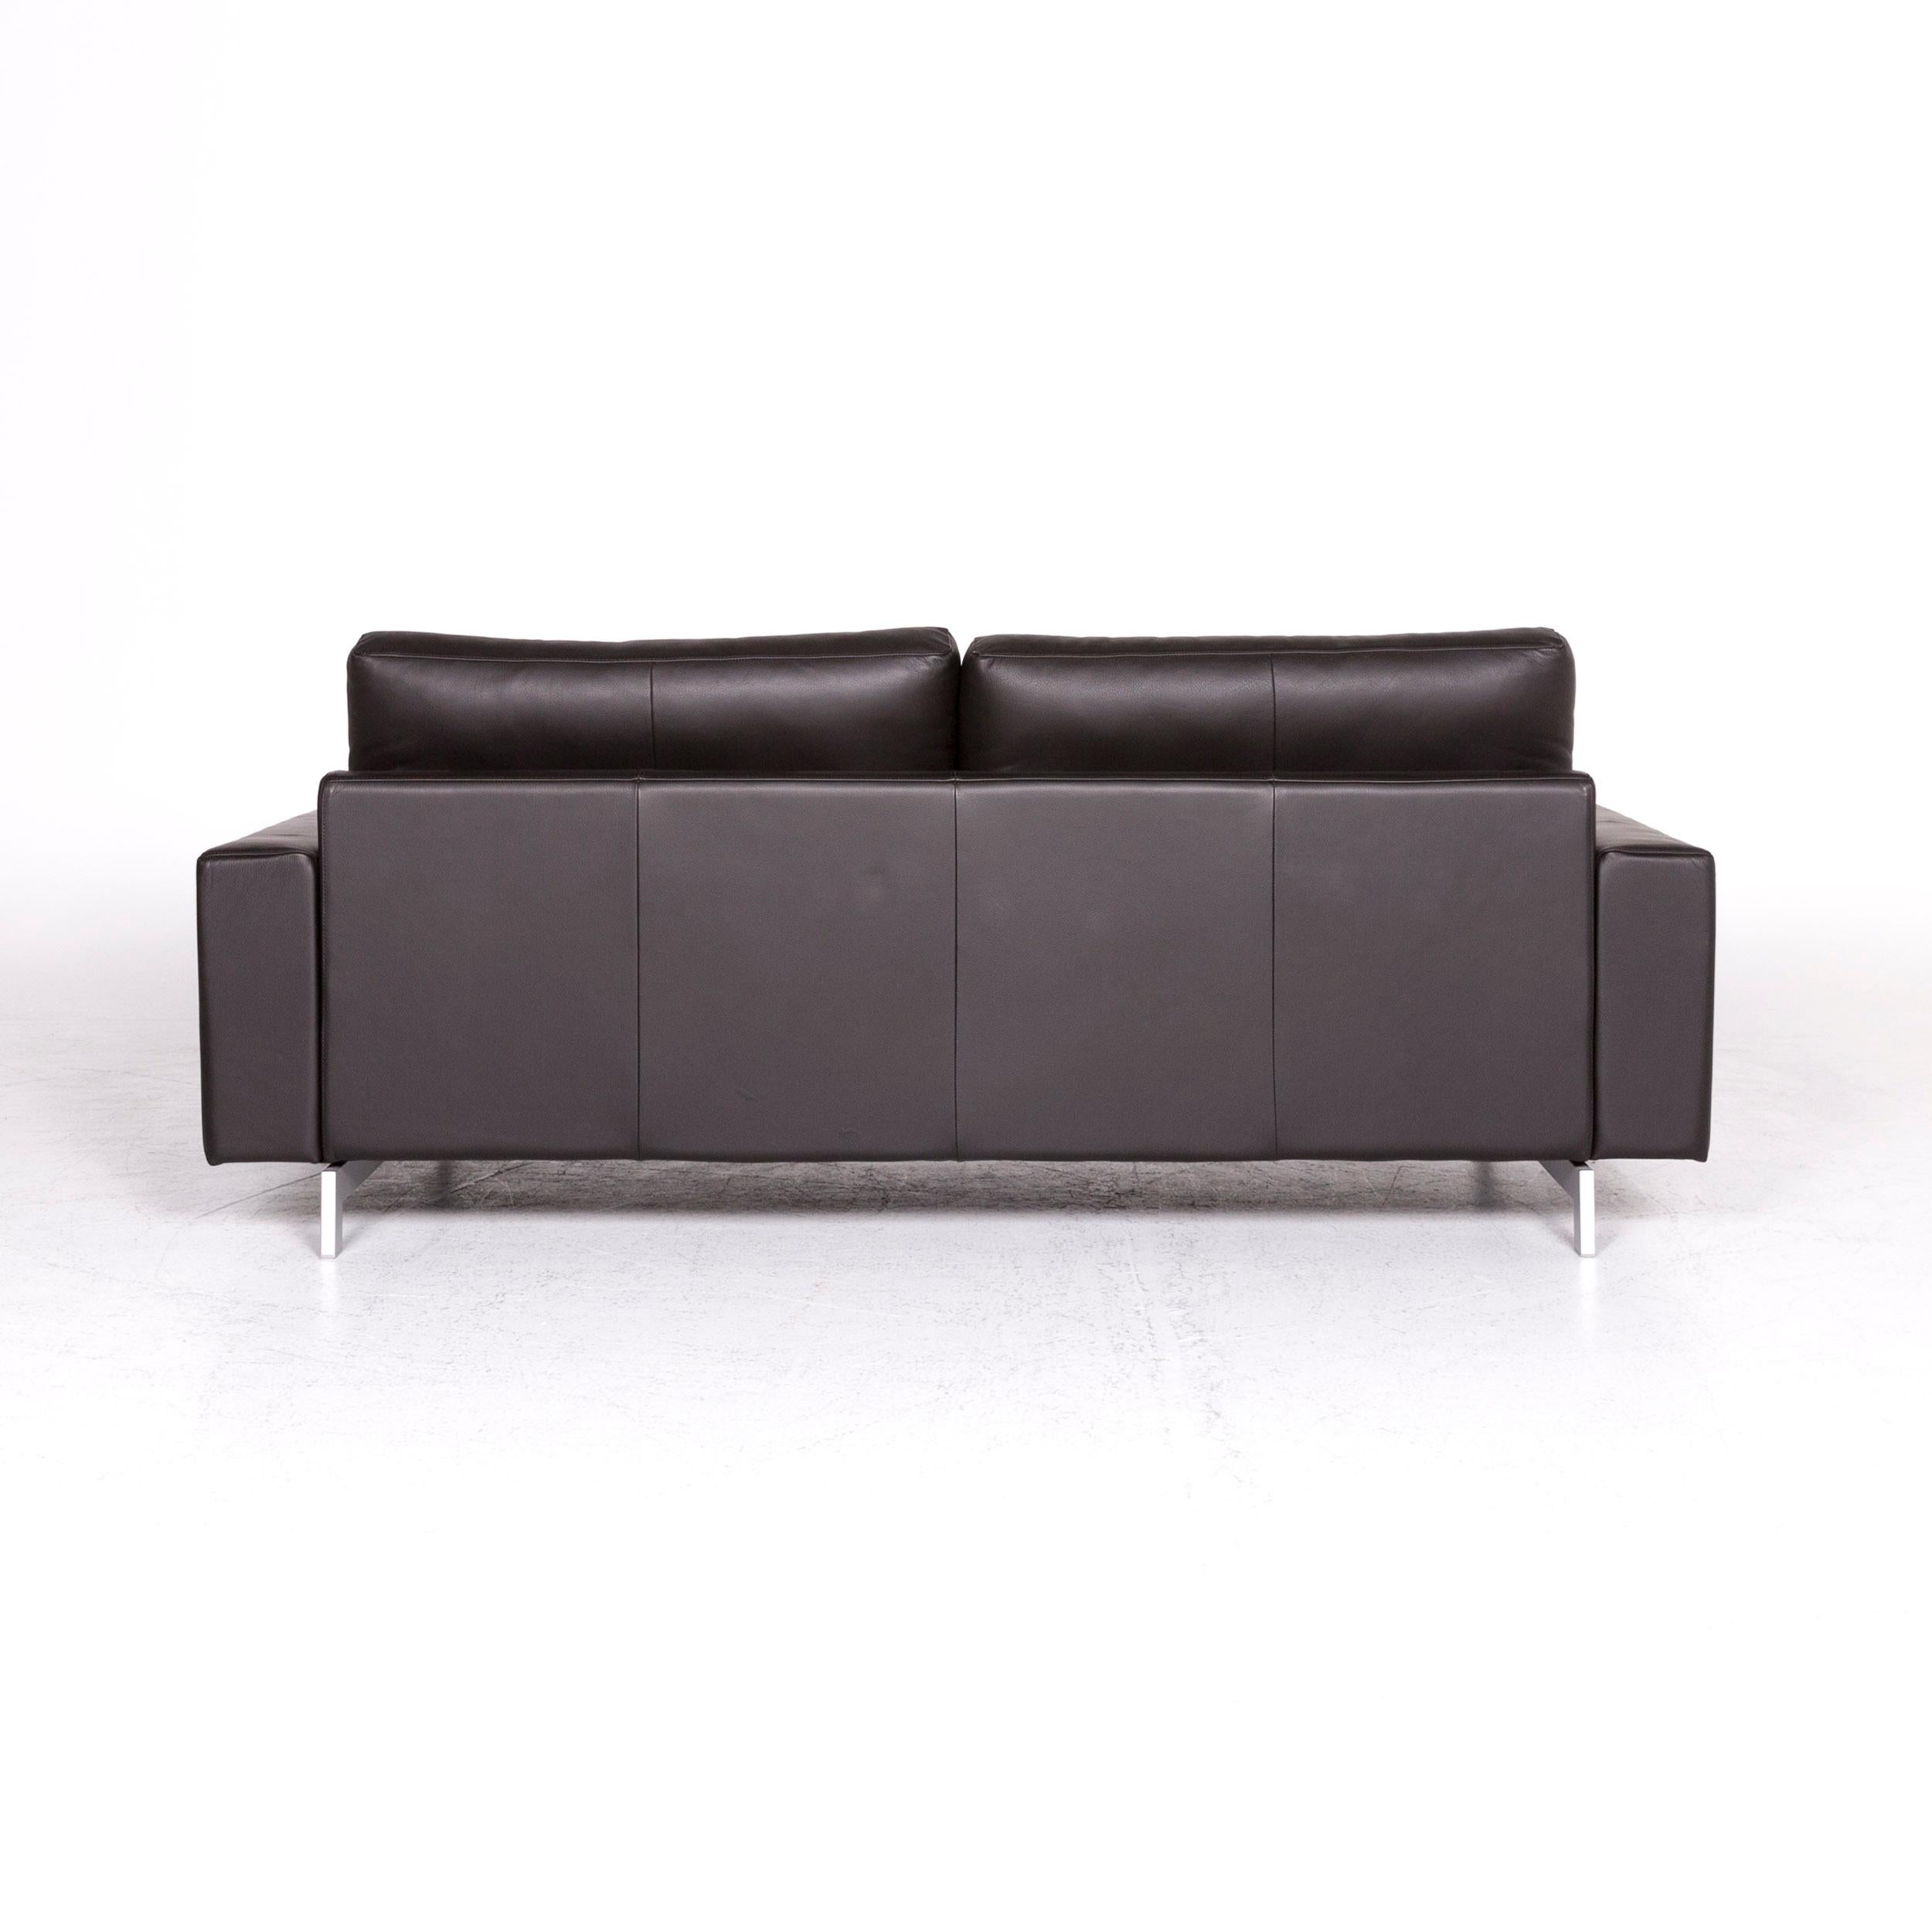 Rolf Benz Vida Designer Leather Sofa Brown Two-Seat Couch 3